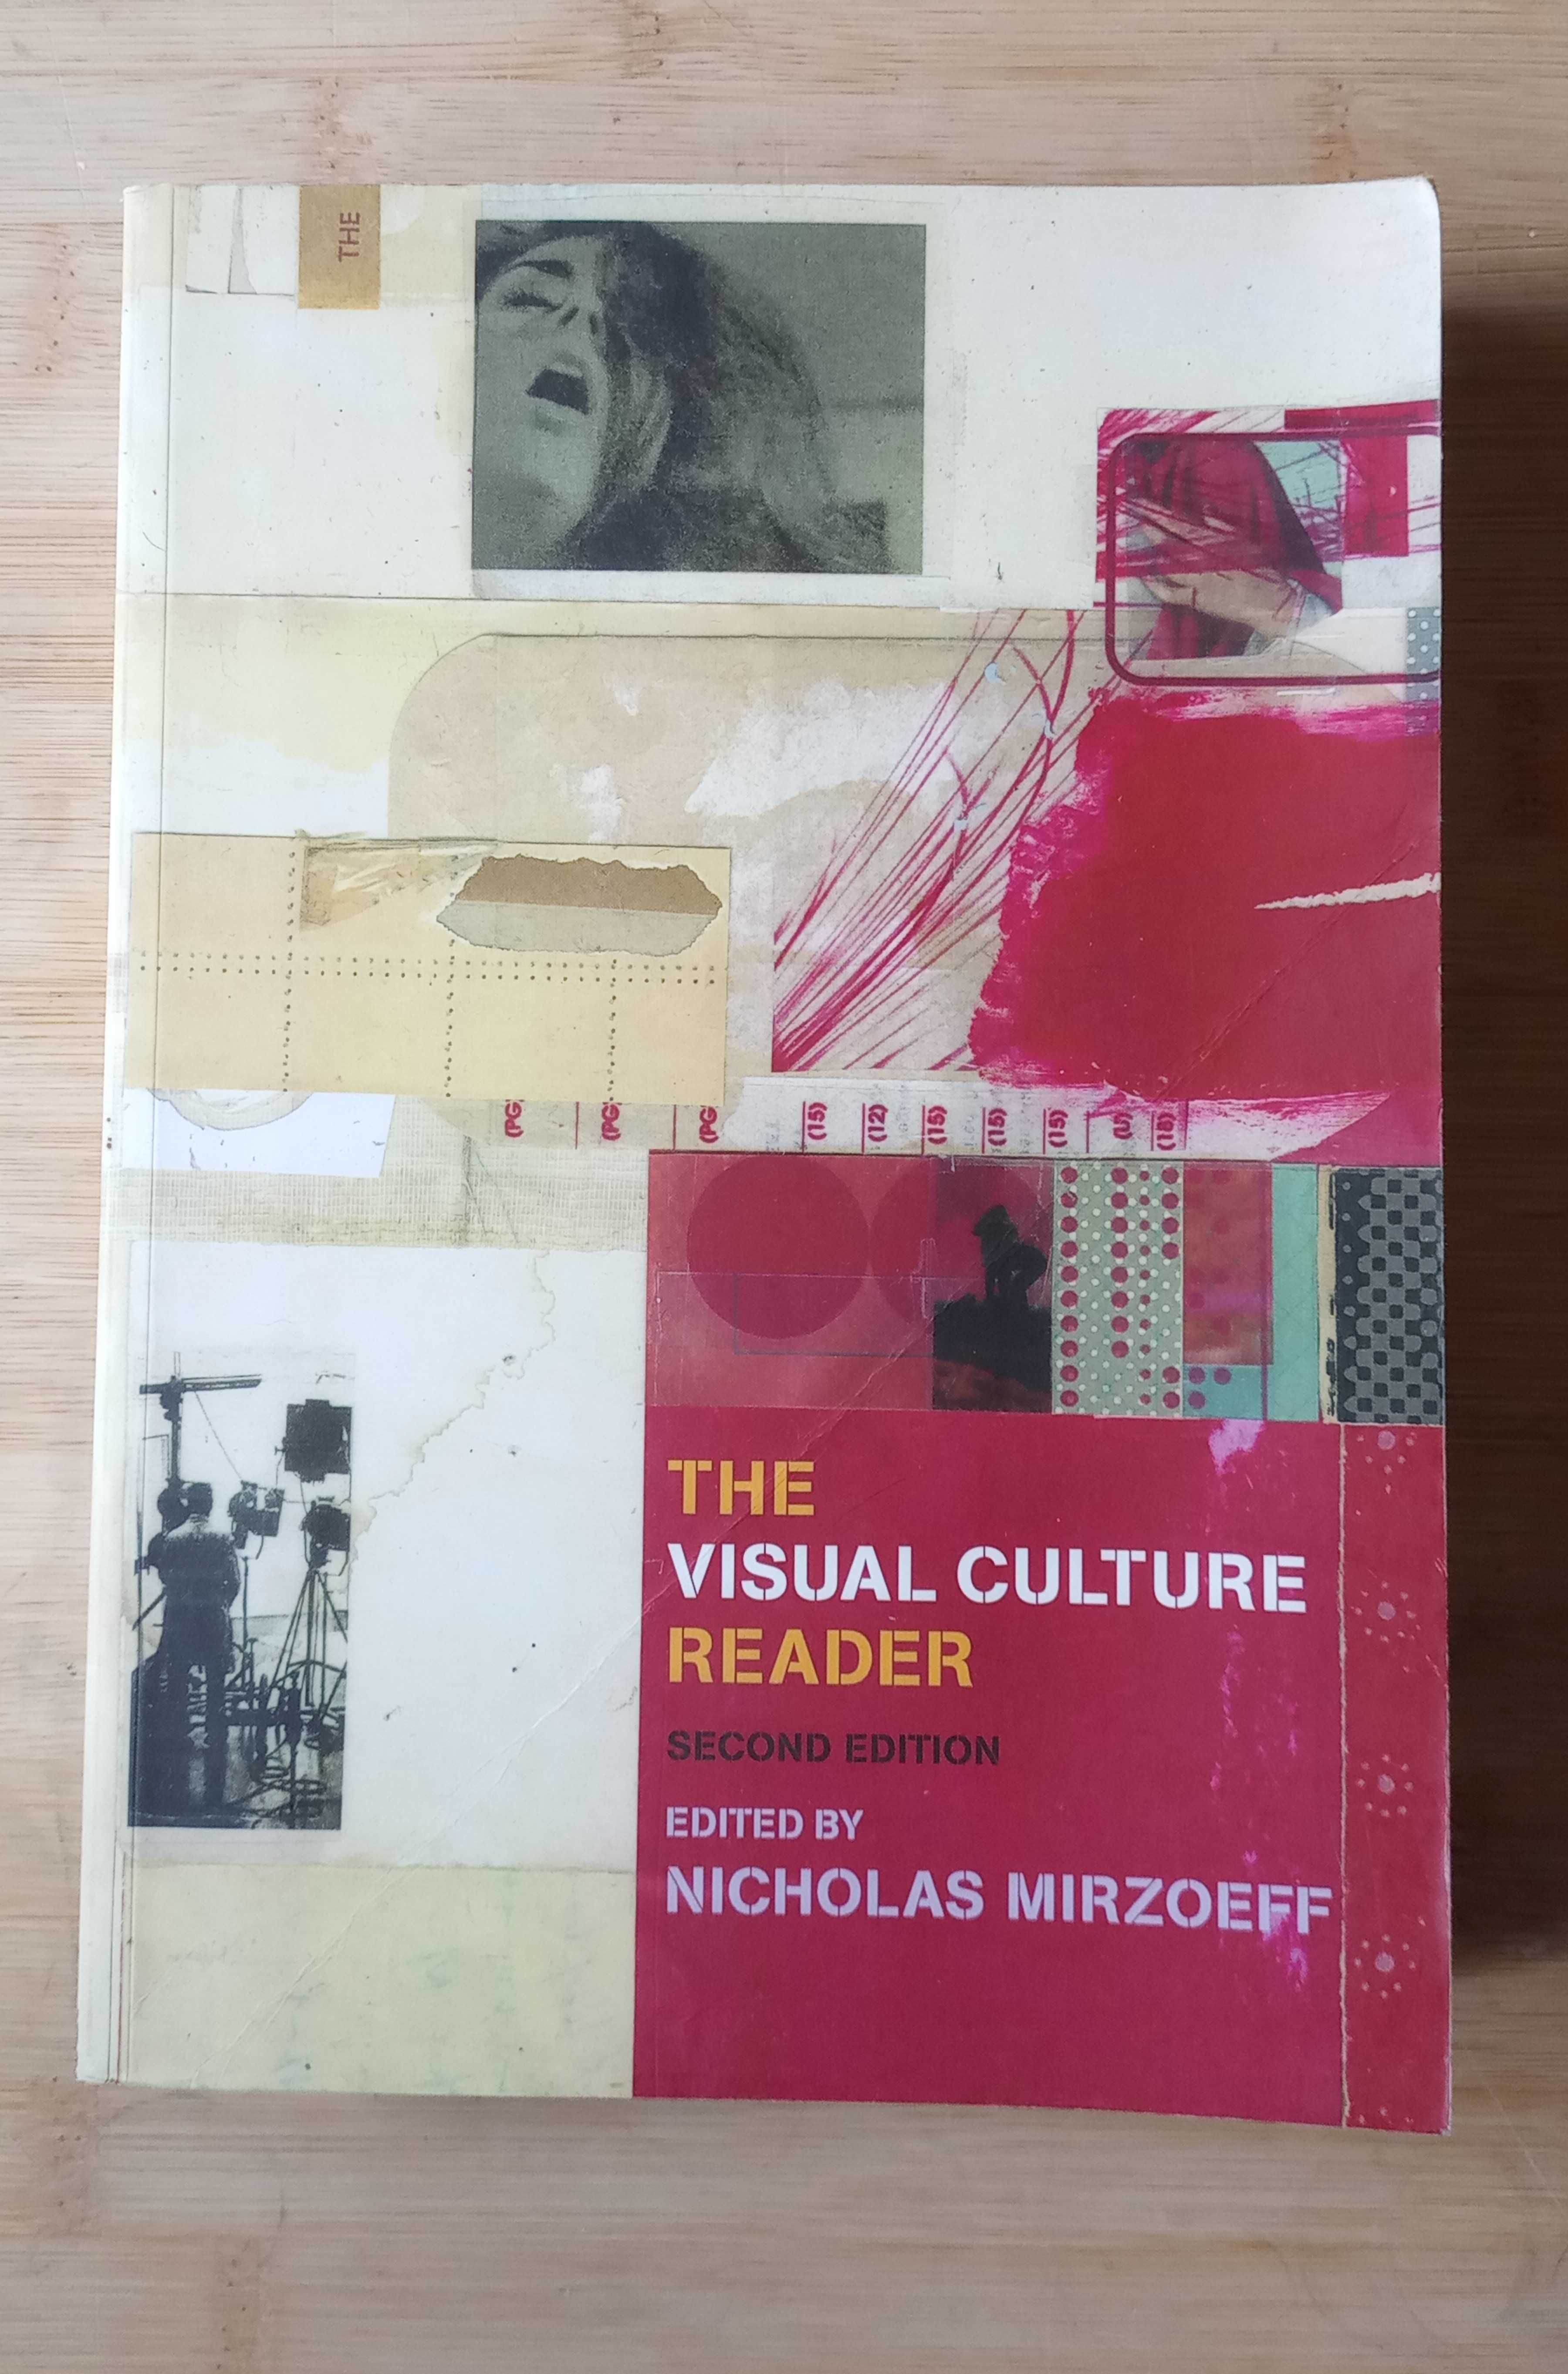 The Visual Culture Reader (Second Edition) by Nicholas Mirzoeff